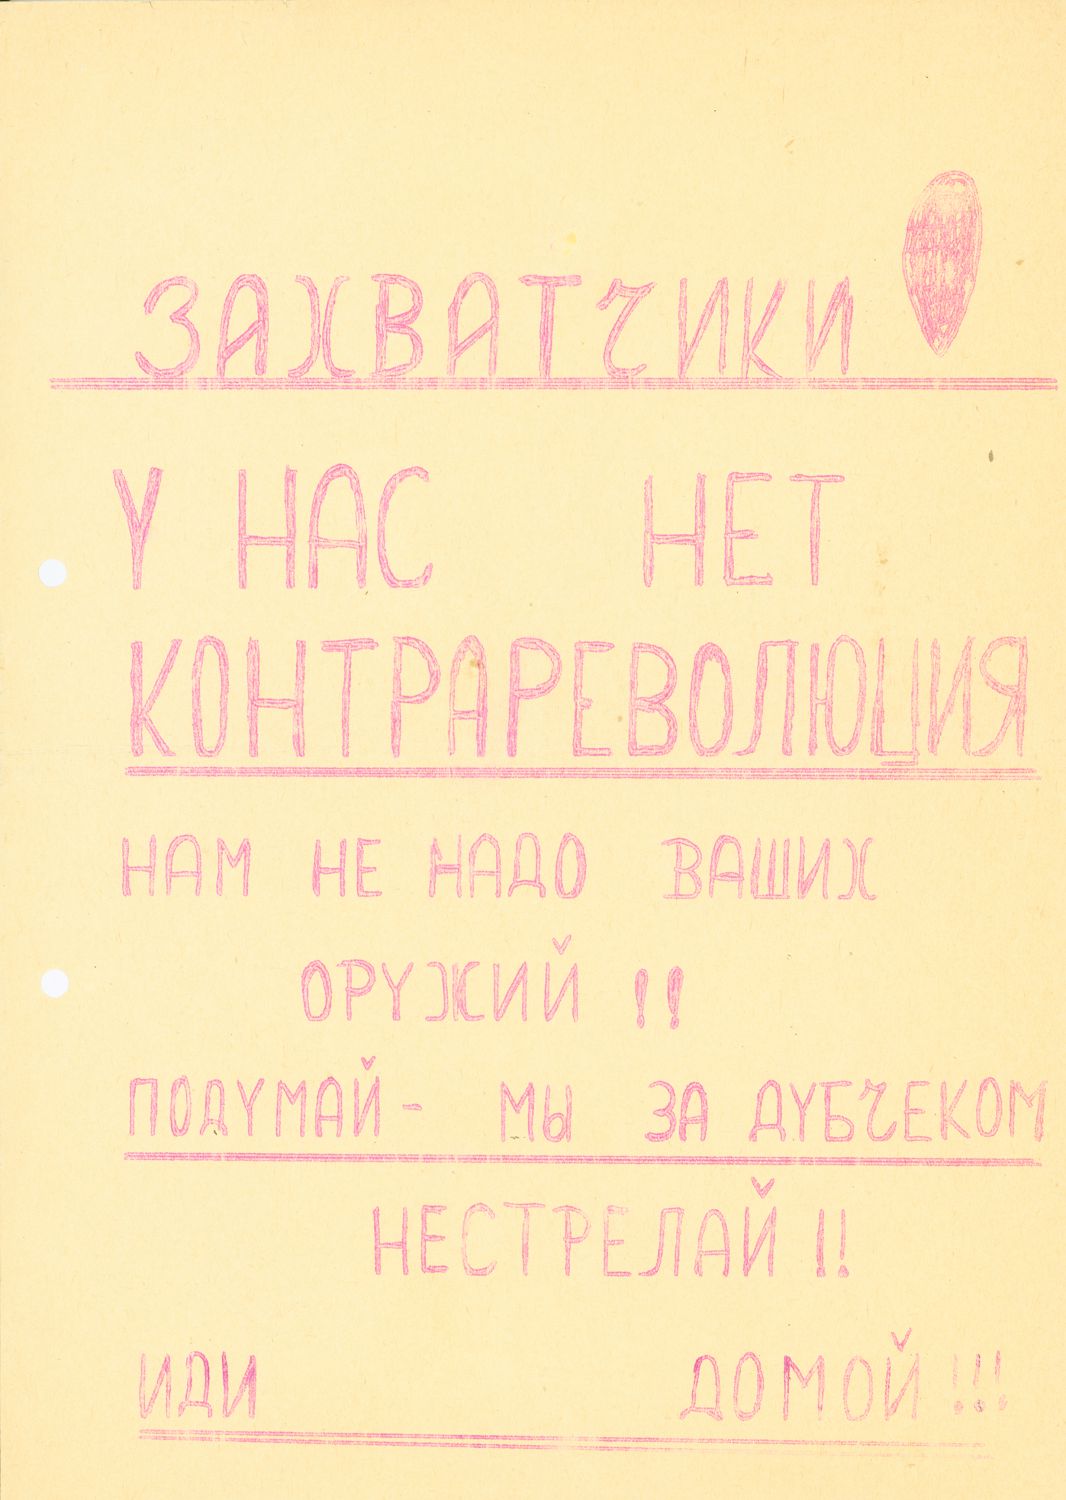 Appeal to the Occupation Forces to Leave Czechoslovakia